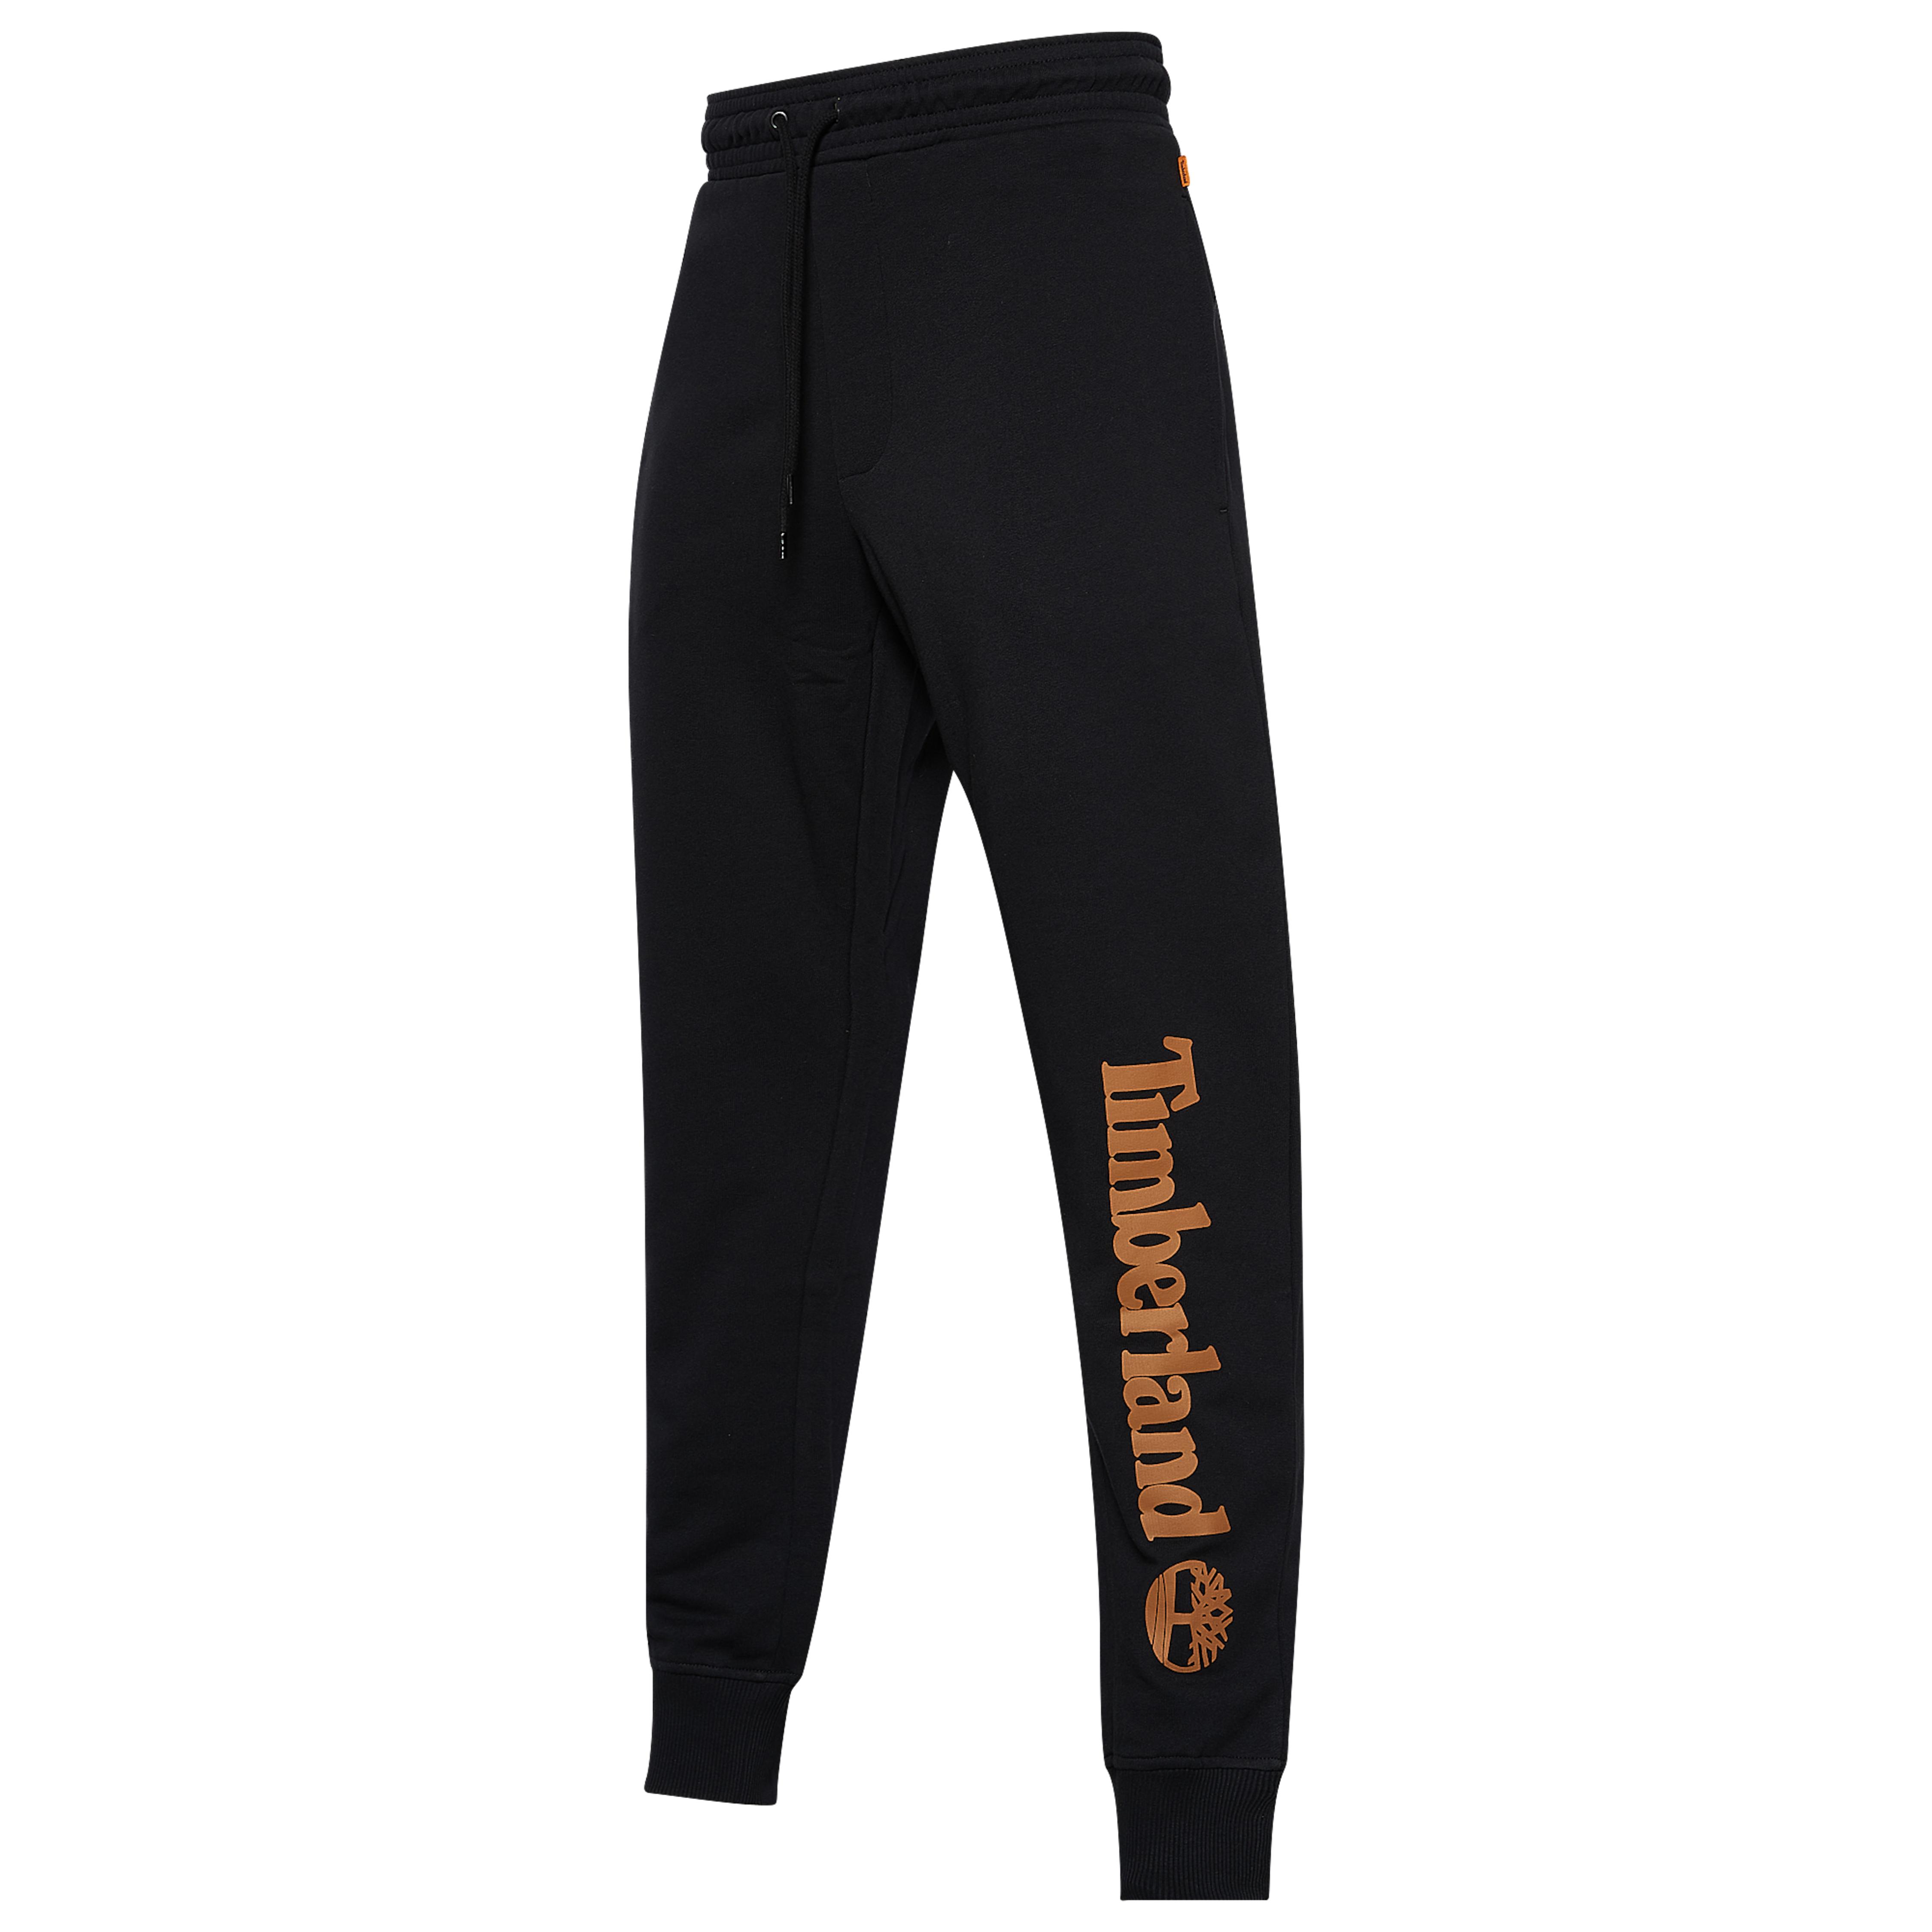 Timberland Cotton Core Tree Logo Sweatpants in Black for Men - Lyst